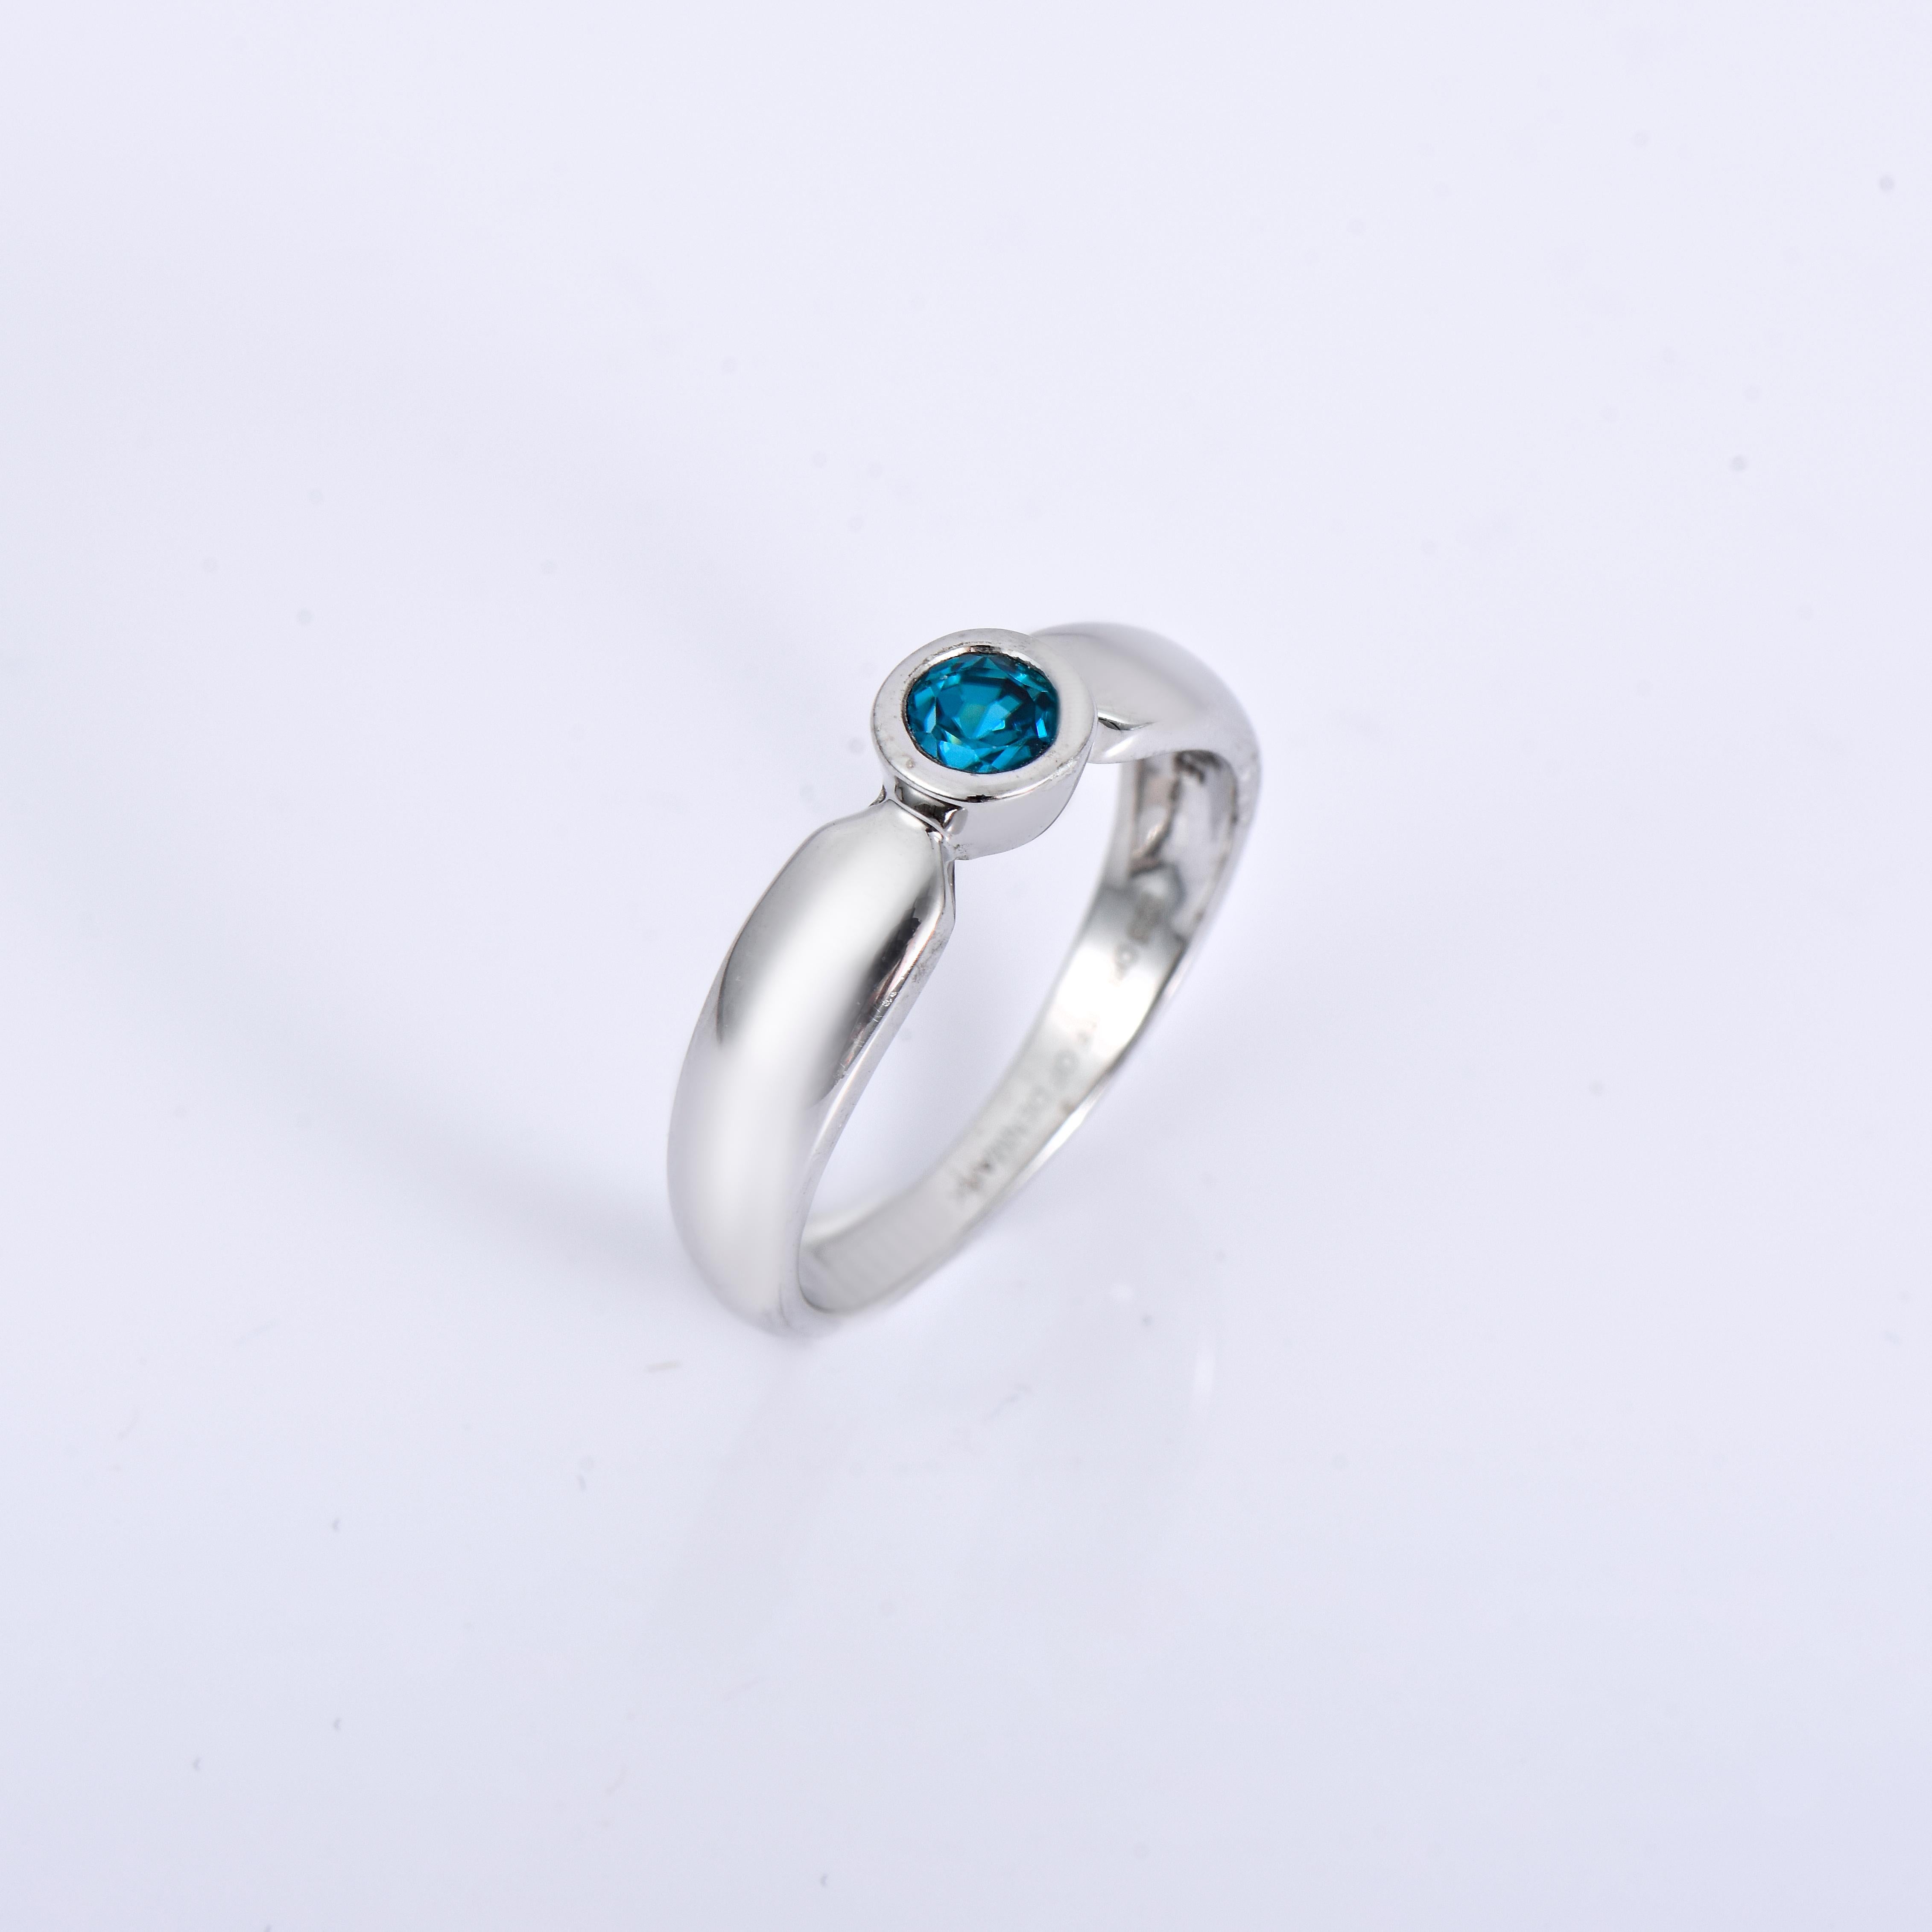 Orloff of Denmark; 925 Sterling Silver Ring set with a 0.55 carat Natural Cambodian Blue Zircon.

This piece has been meticulously hand-crafted out of 925 sterling silver.
In the center sits a 0.55 carat blue zircon mined, polished, and cut in